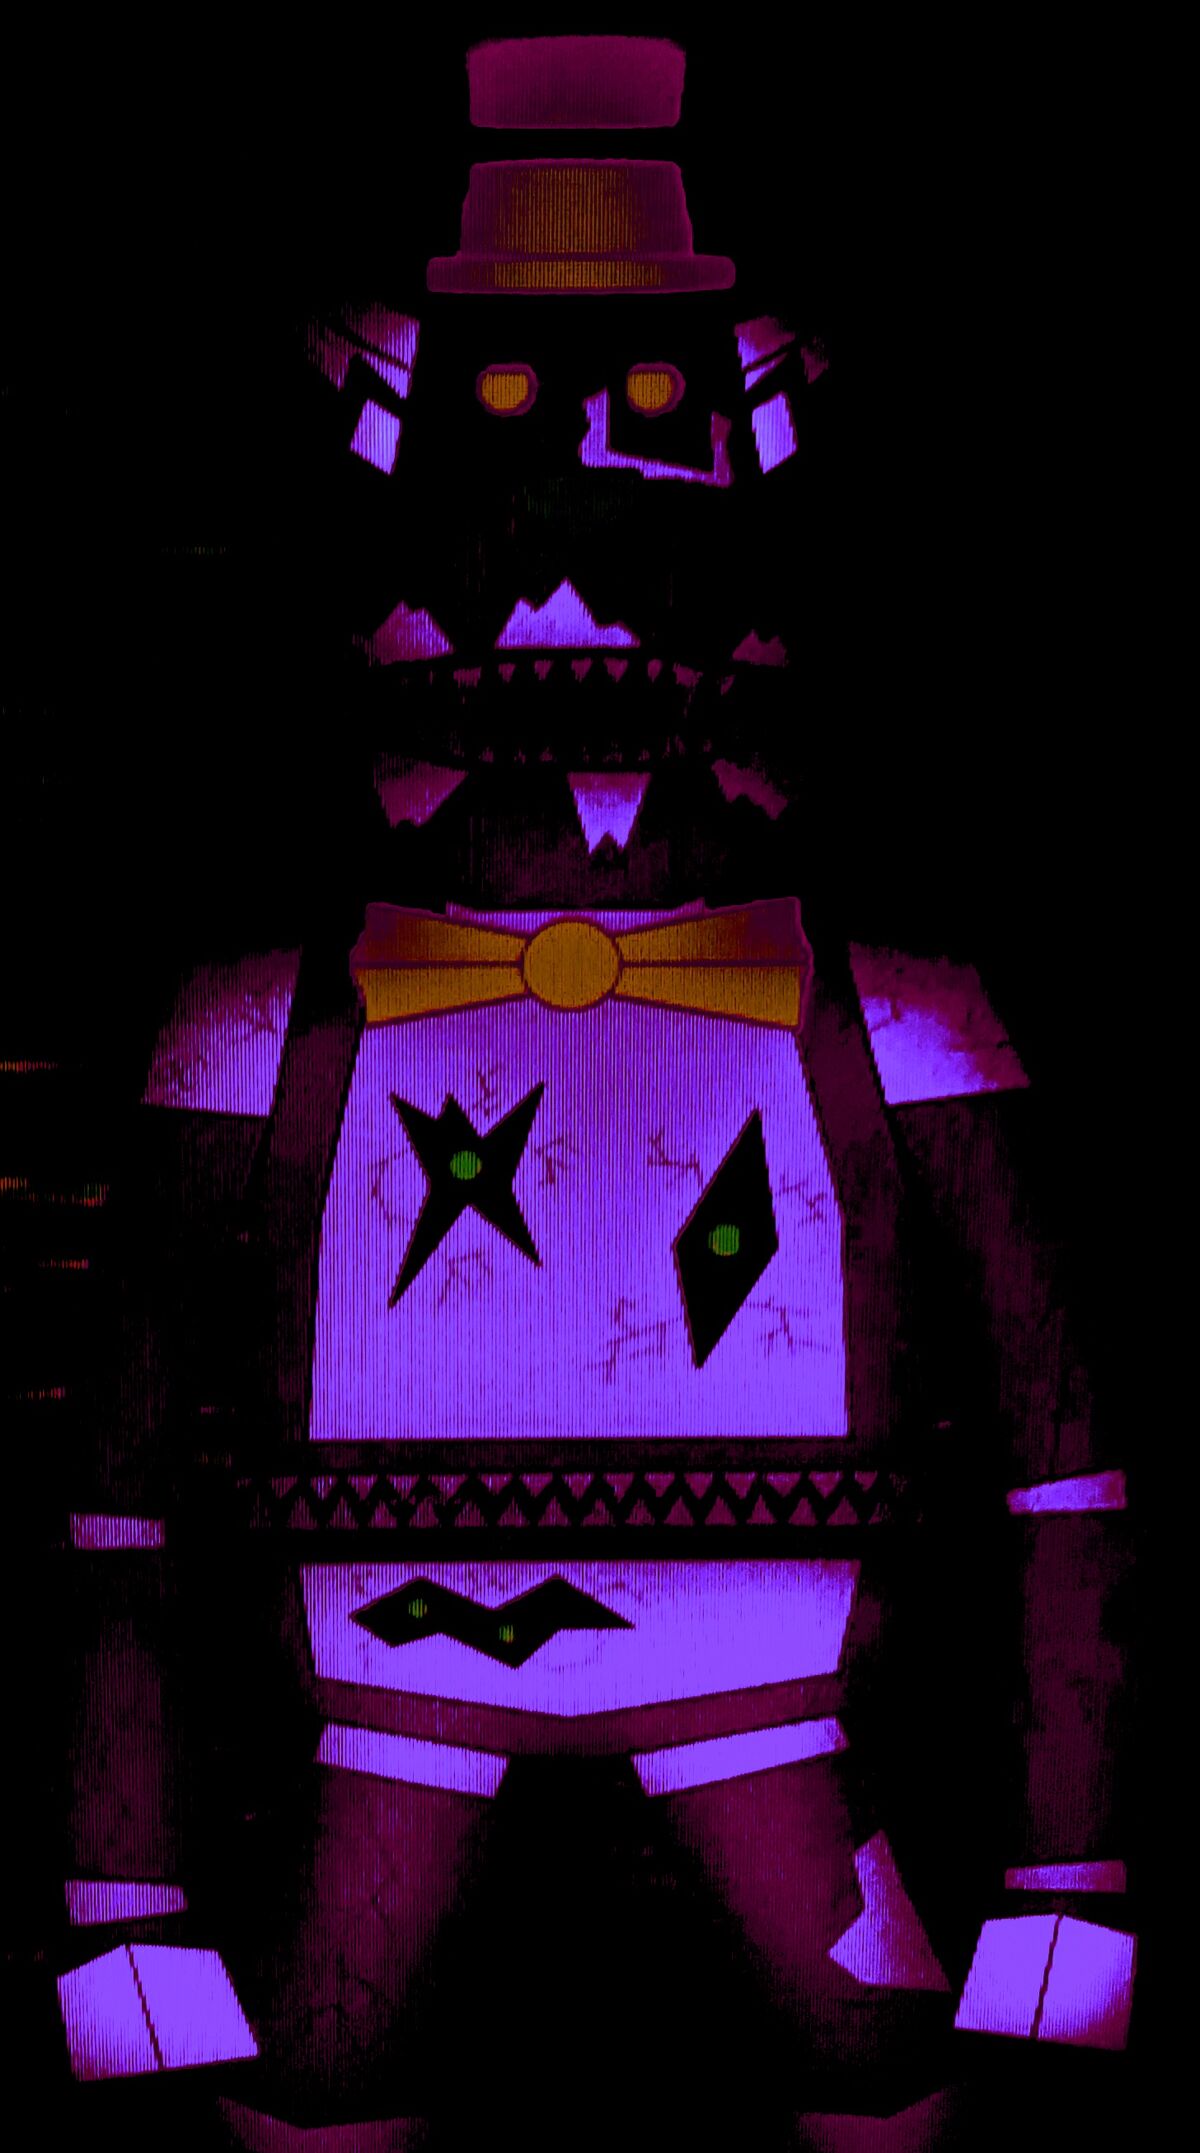 The Black Box — violetowly: Nightmares FNaF in Burton style or